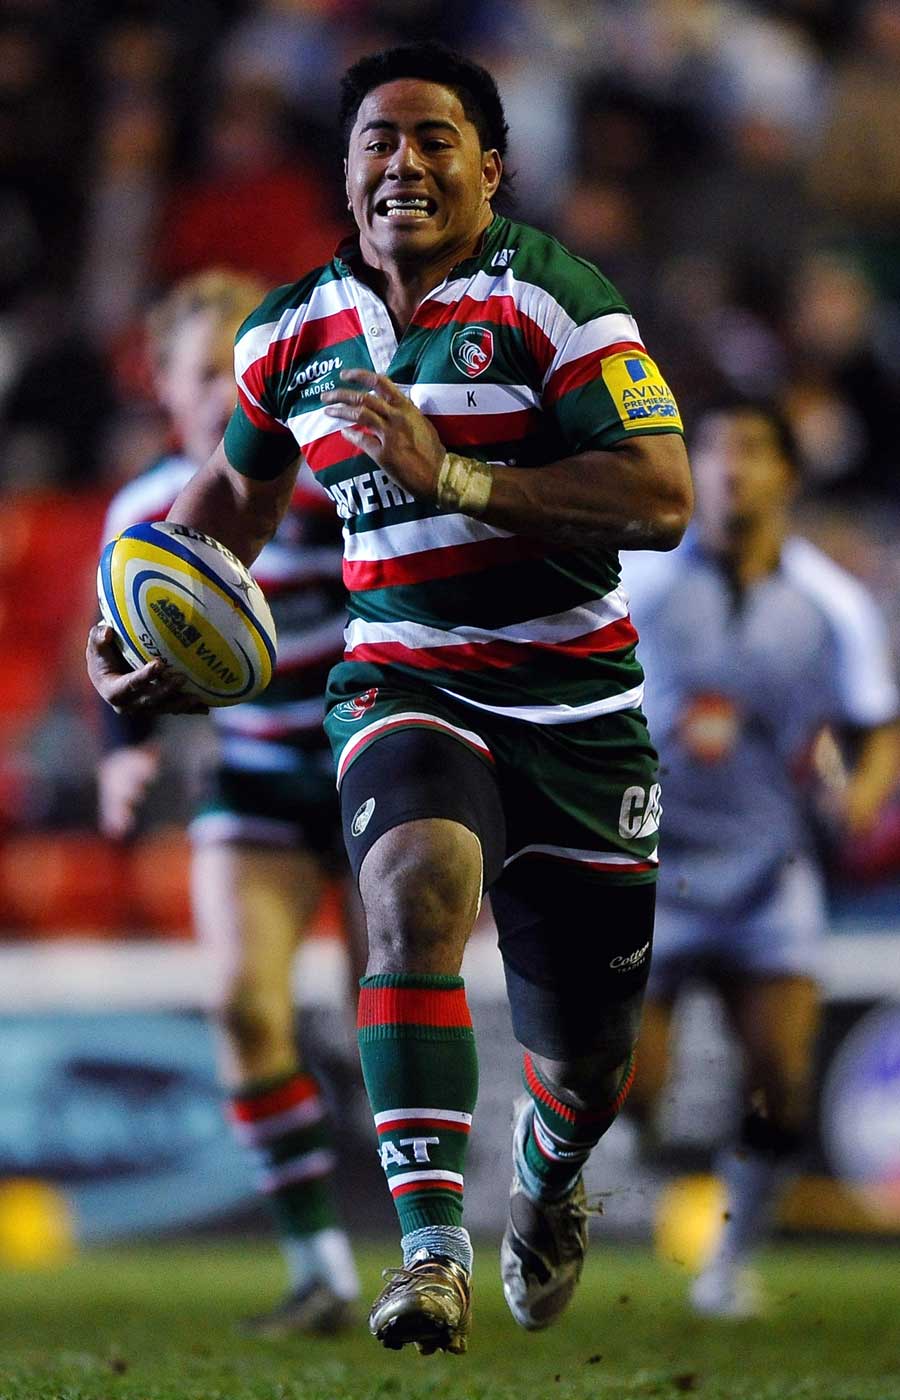 Manu Tuilagi races clear for Leicester, Aviva Premiership, Welford Road, Leicester, England, November 27, 2010 